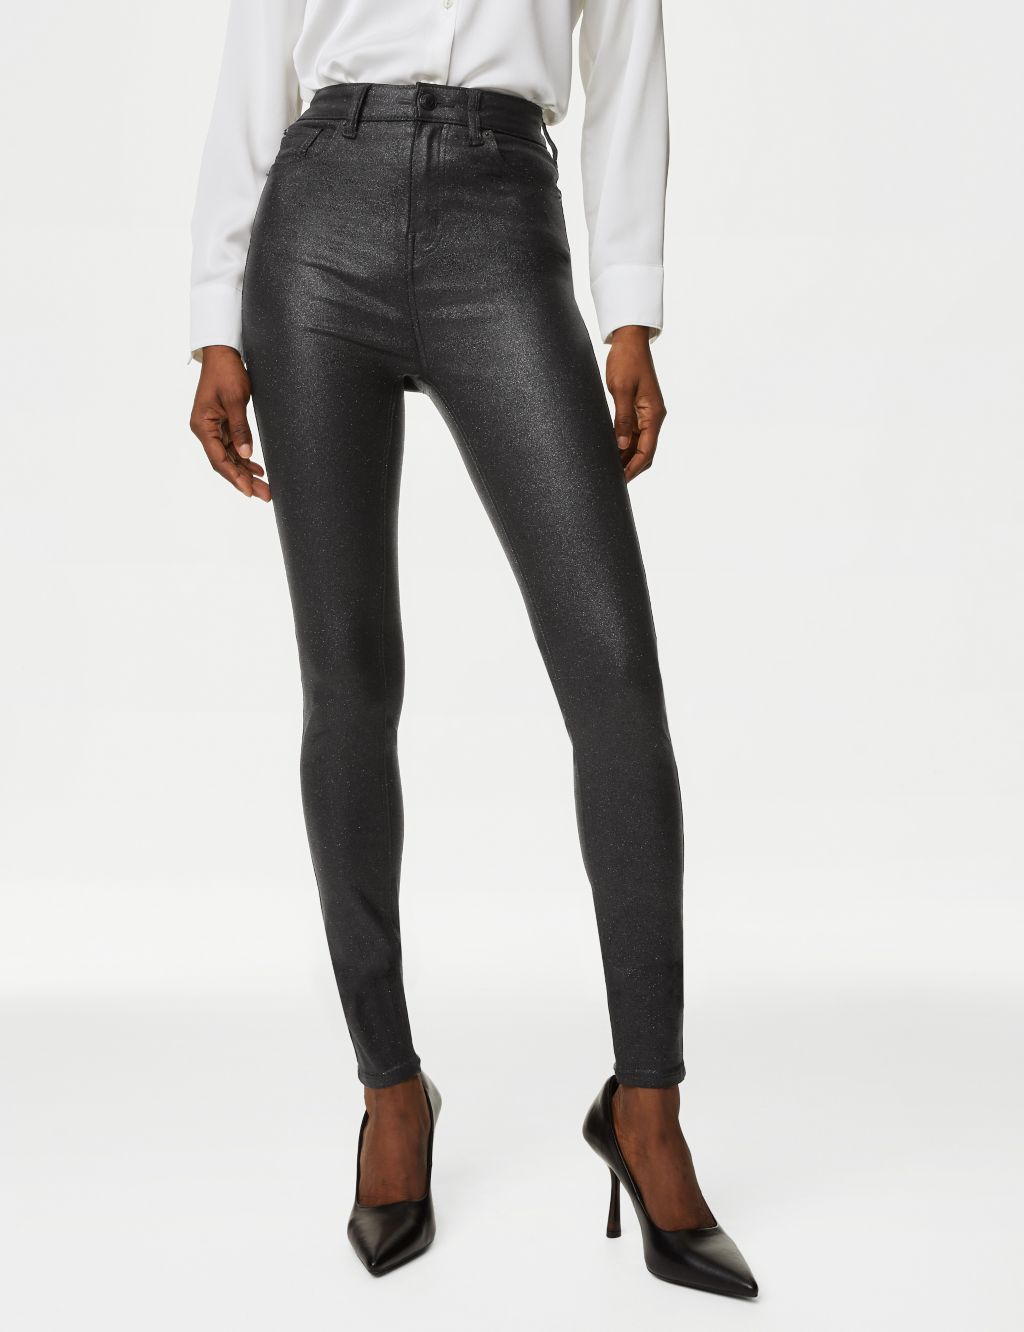 Ivy High Waisted Shimmer Skinny Jeans image 3